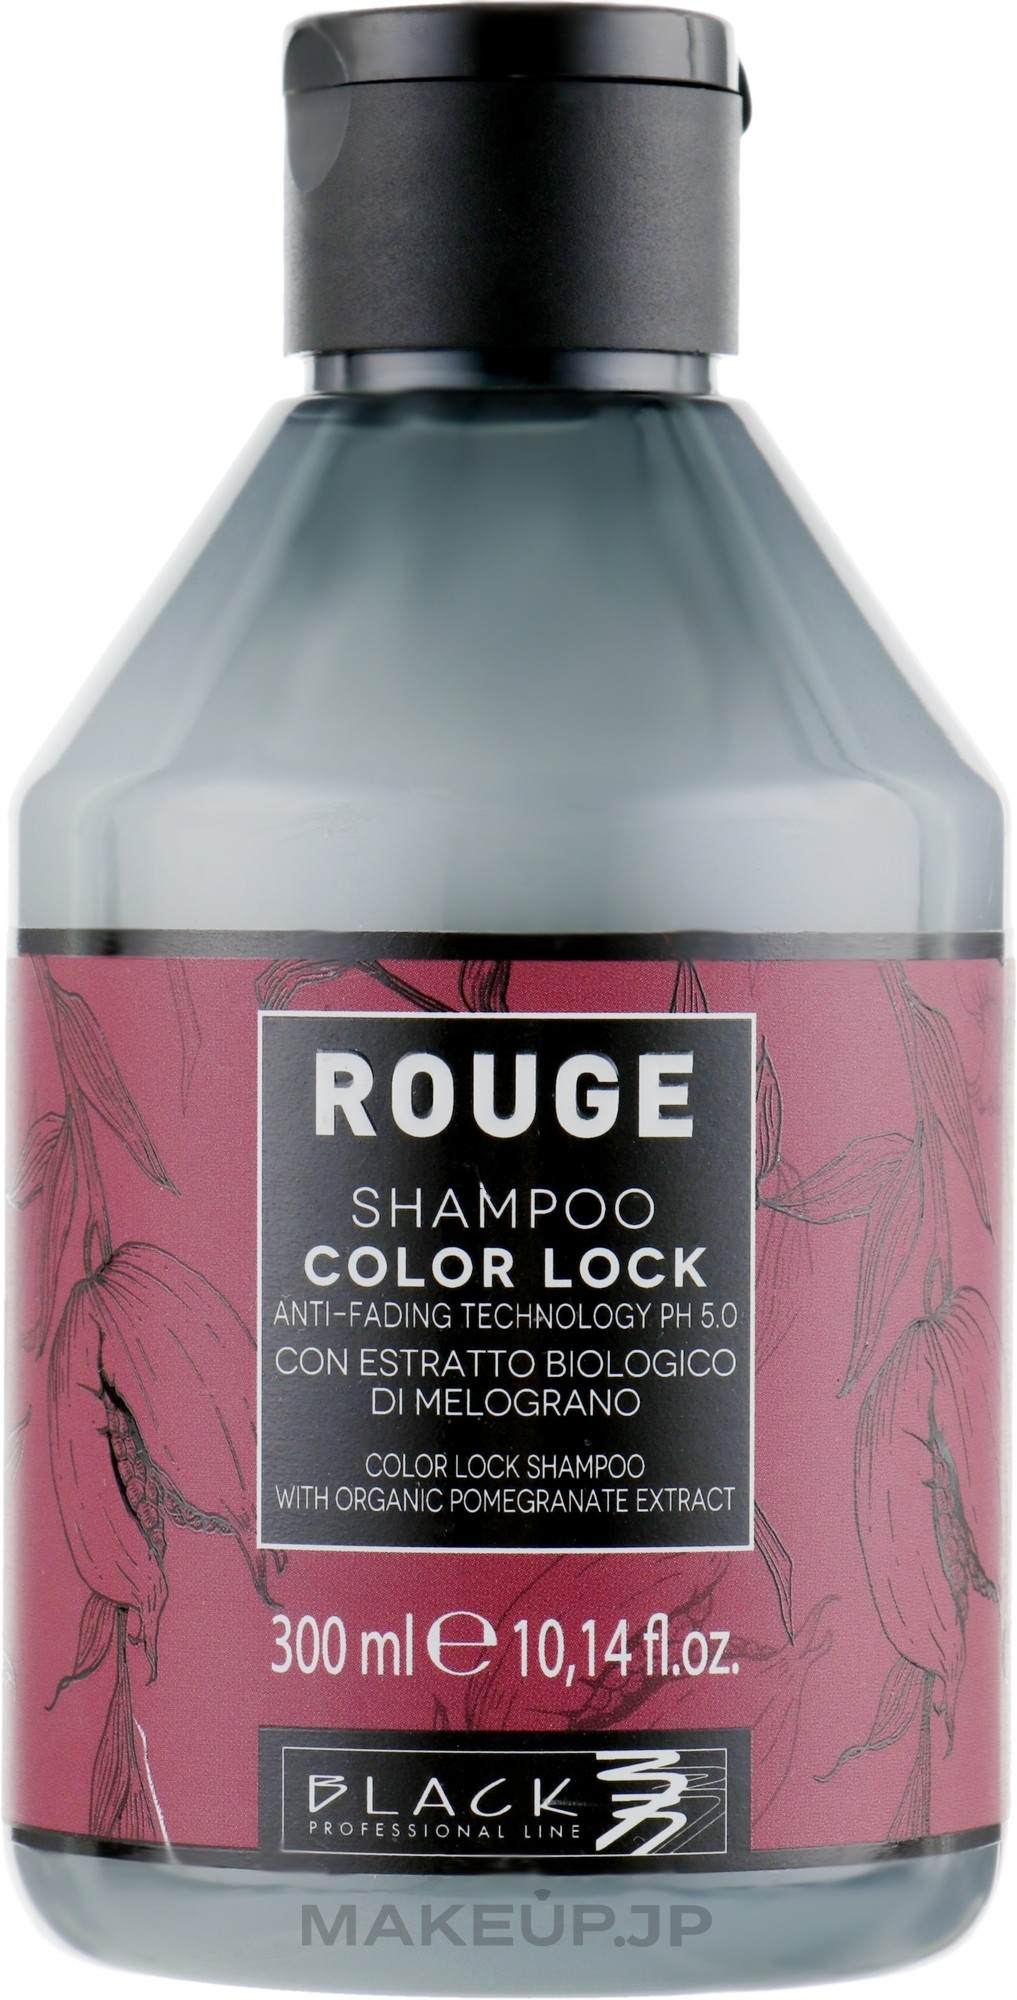 Sulfate-Free Shampoo for Colored Hair - Black Professional Line Rouge Color Lock Shampoo — photo 300 ml